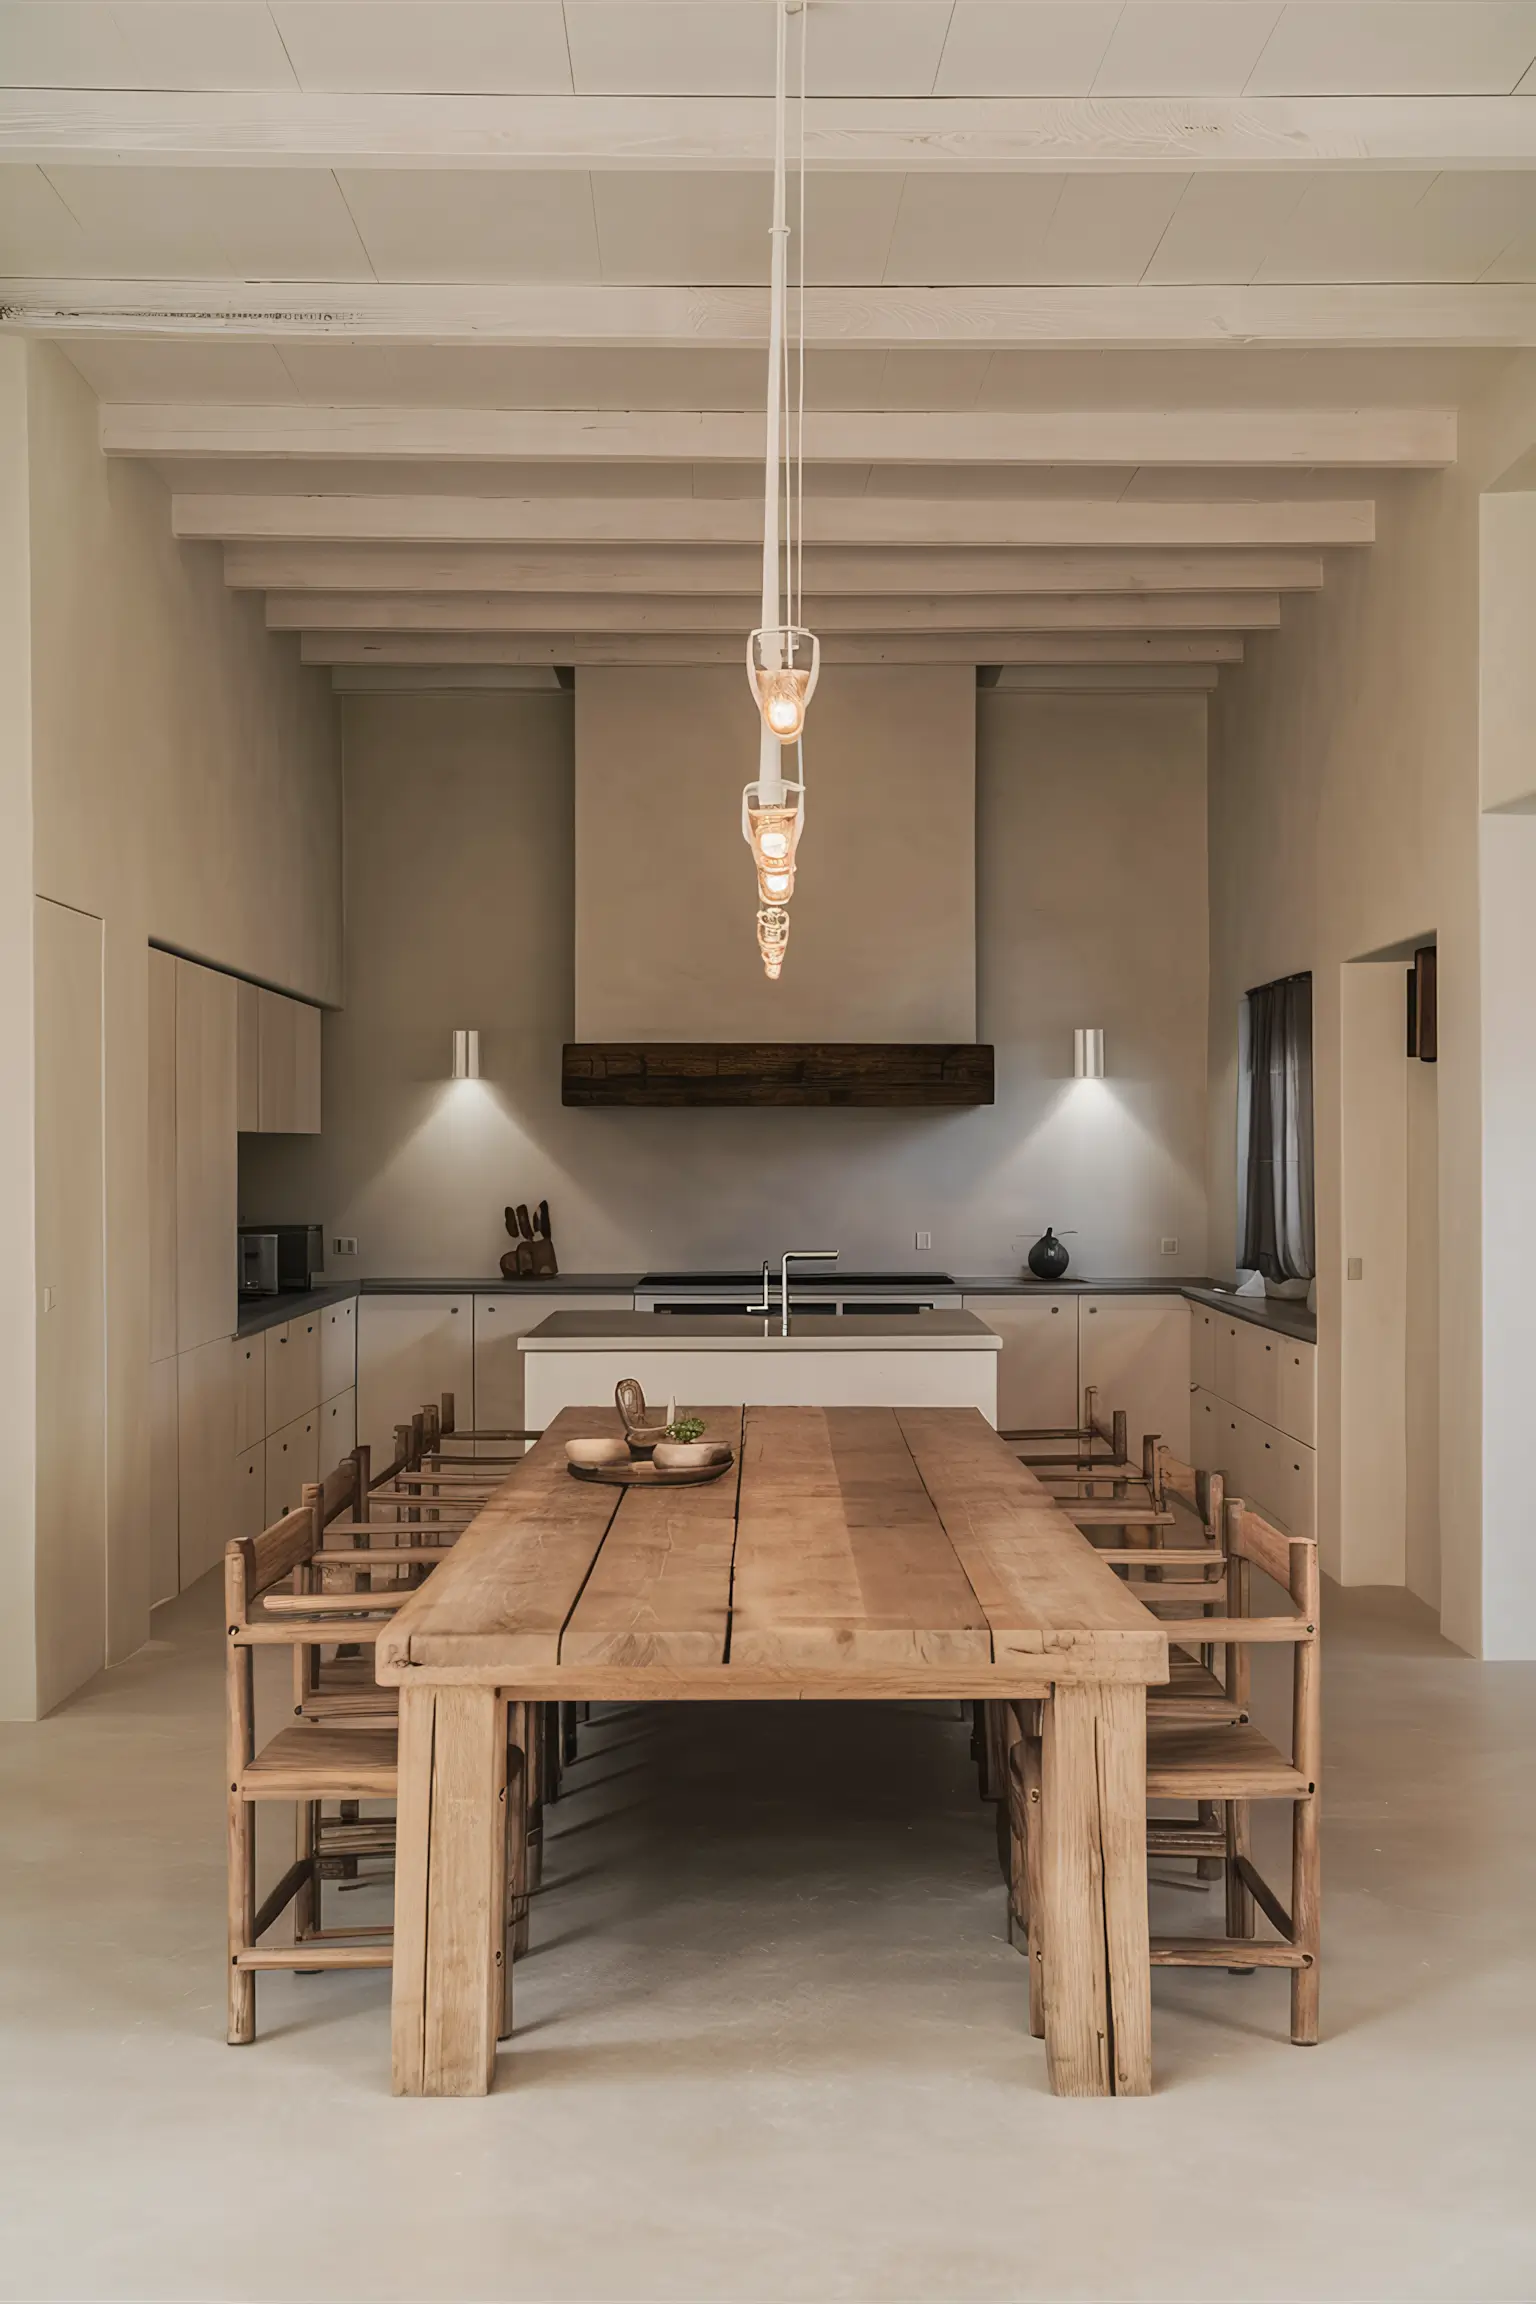 Minimalistic modern farmhouse kitchen with rustic wood accents and contemporary lighting.